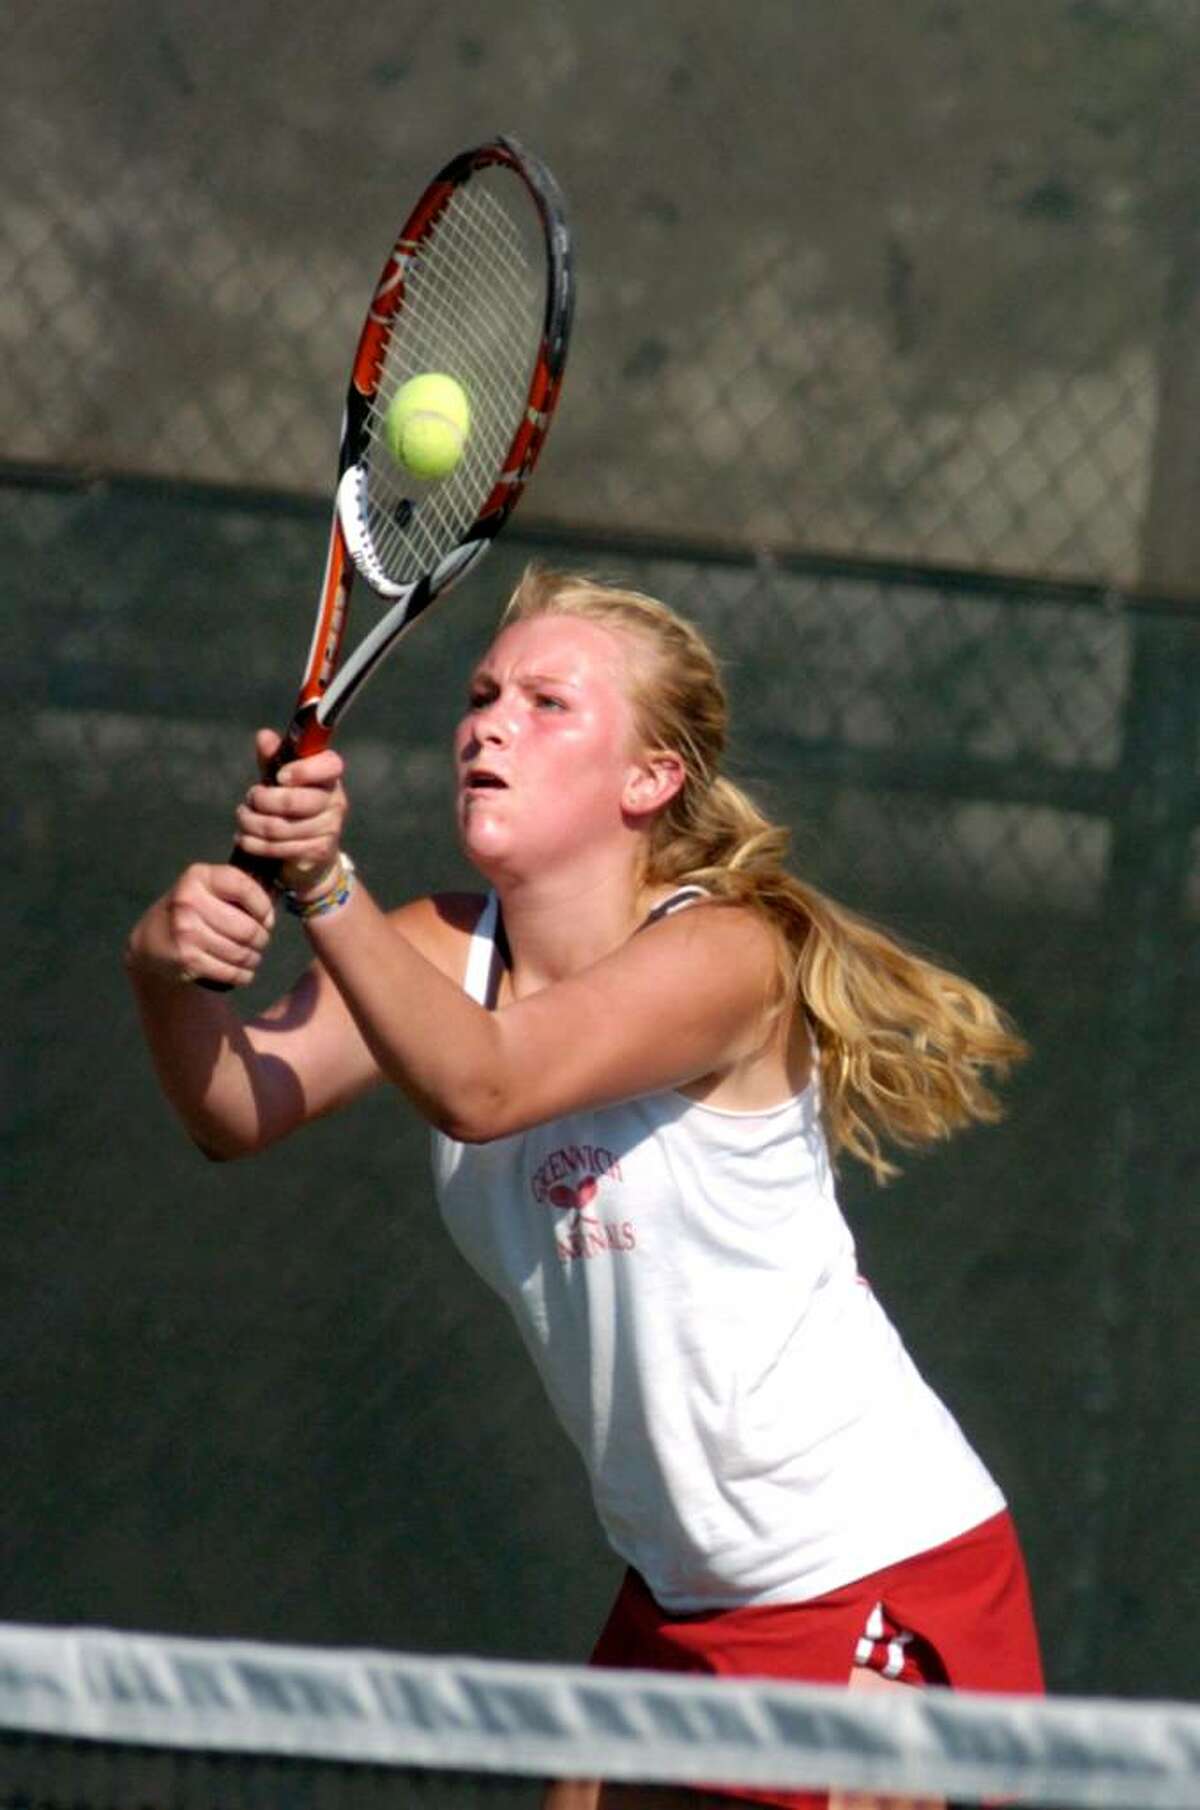 Anna Sweeney of Greenwich High School during her doubles match against New Canaan High School, at Wilton High School for the FCIAC Championship, Wednesday, May 26, 2010.